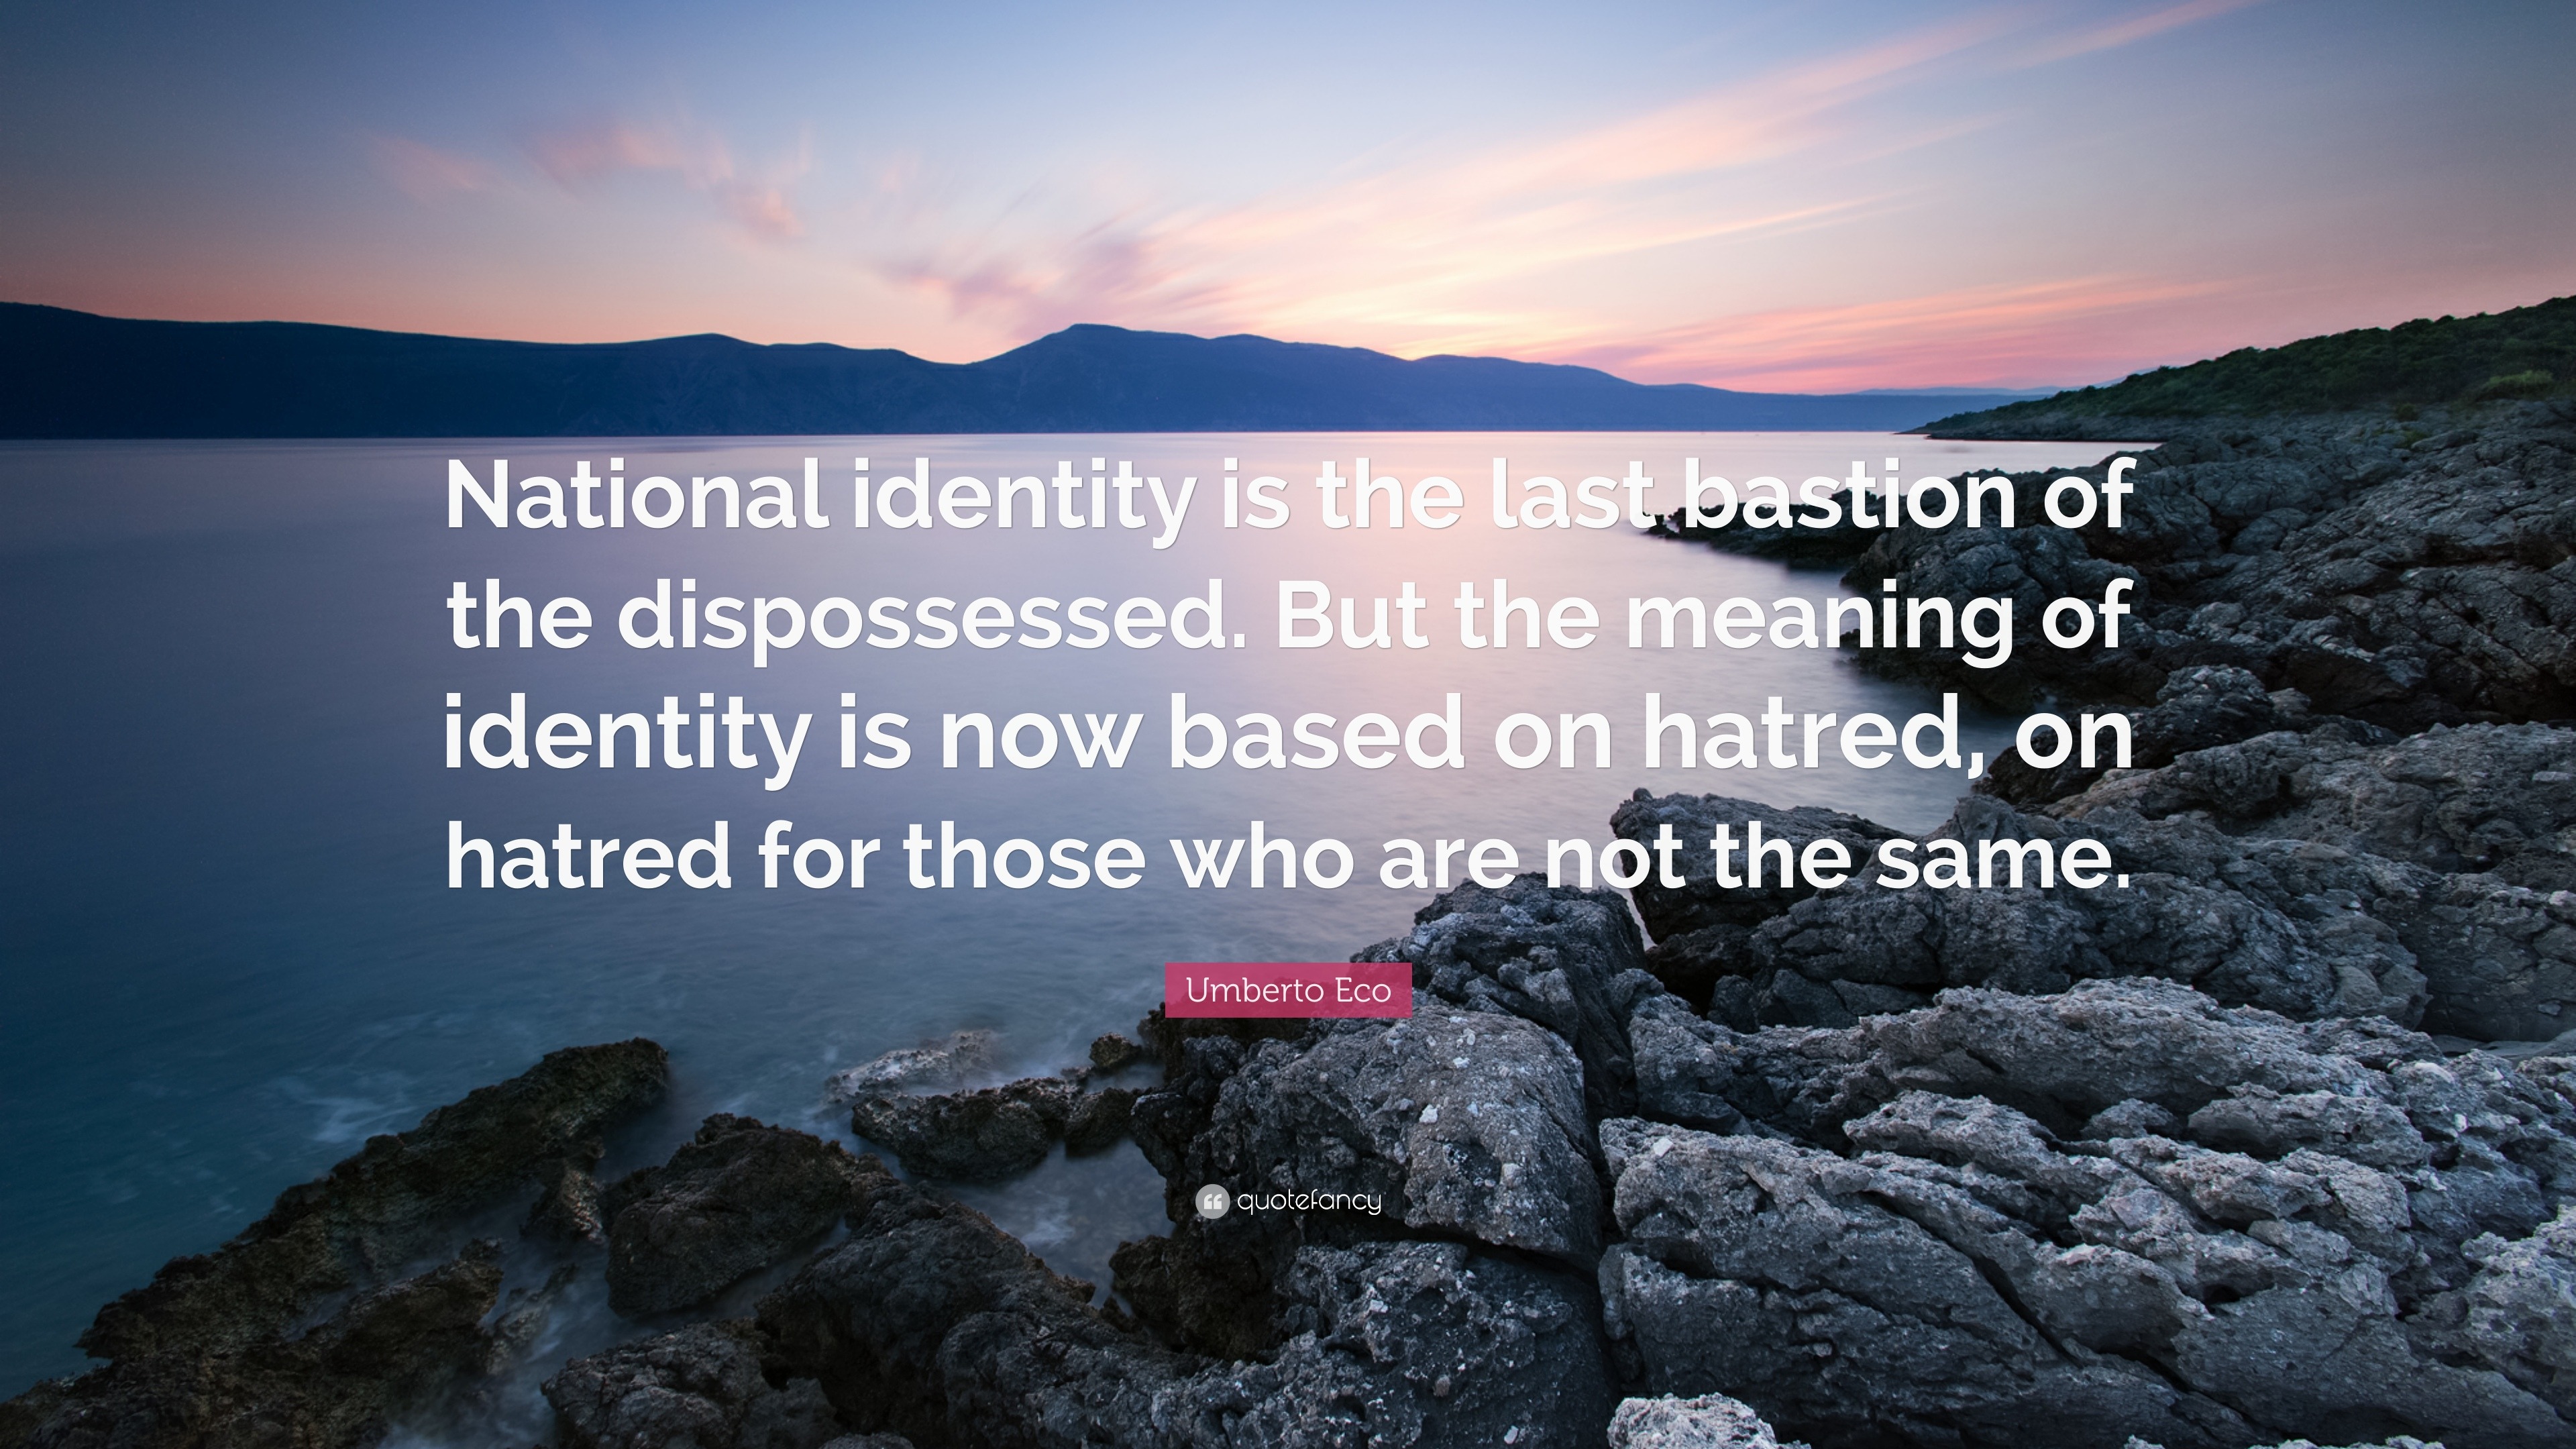 Umberto Eco Quote: “National identity is the last bastion of the